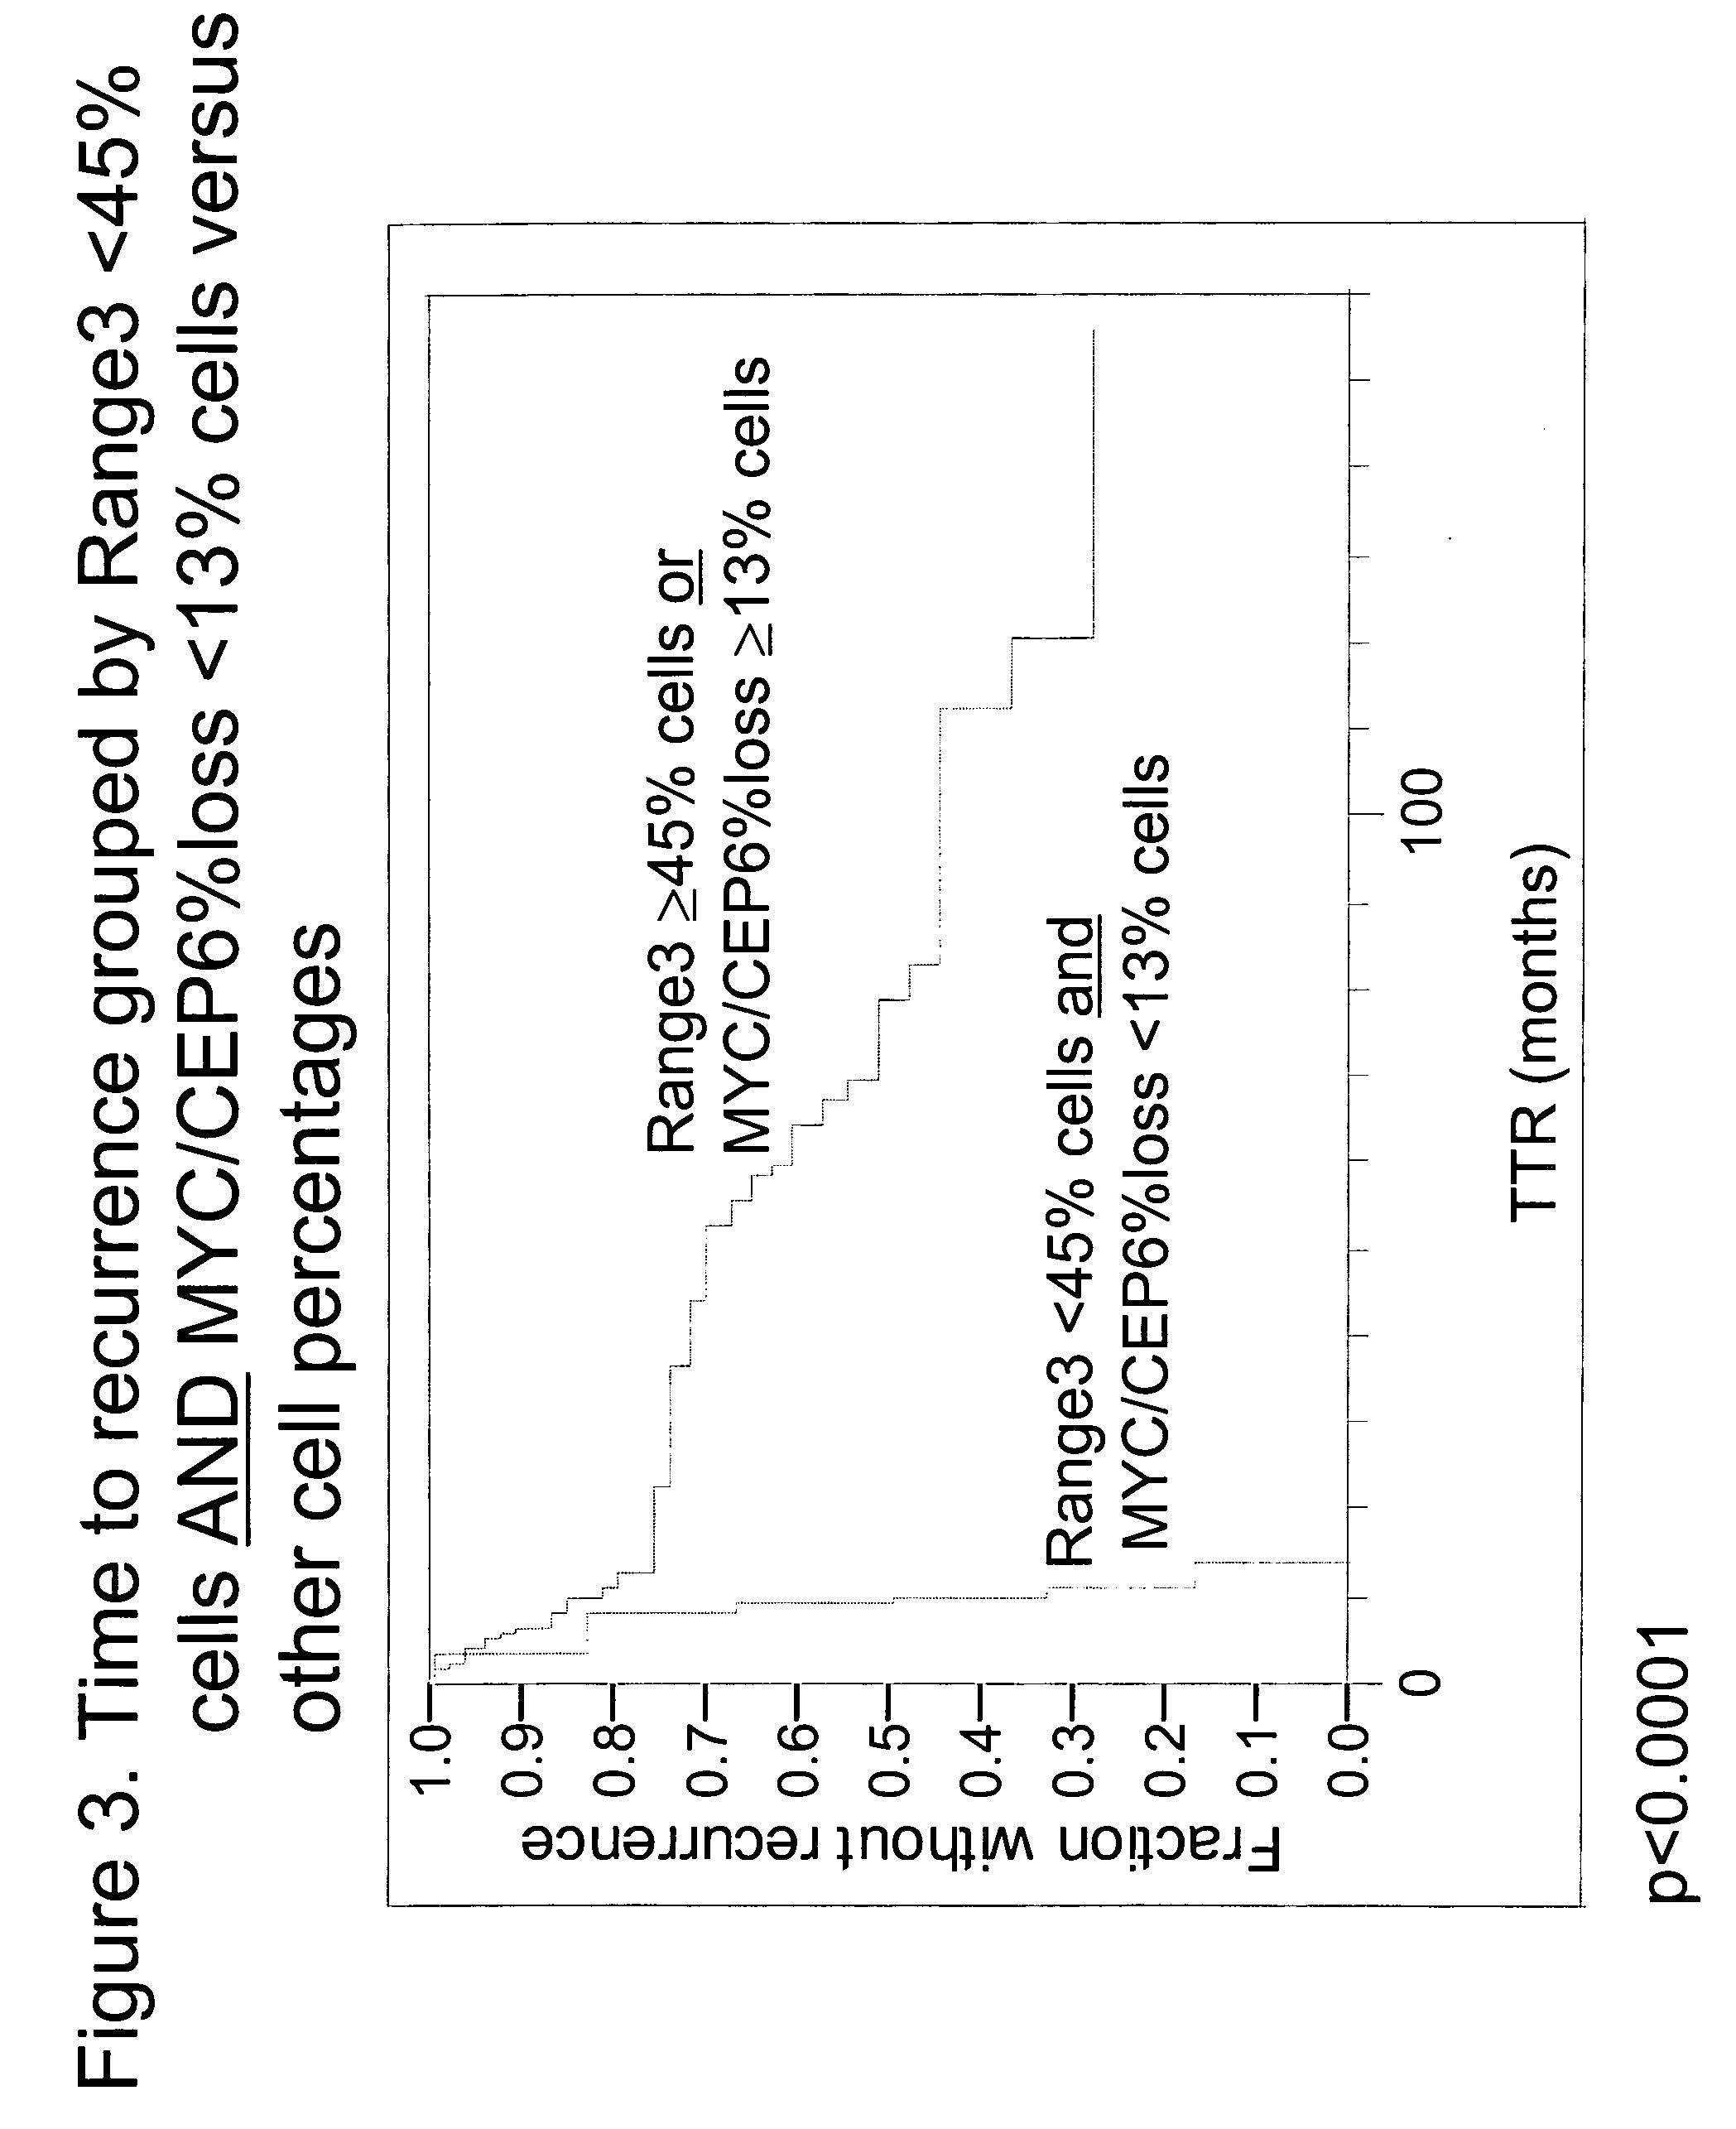 Diagnostic methods for determining prognosis of non-small cell lung cancer